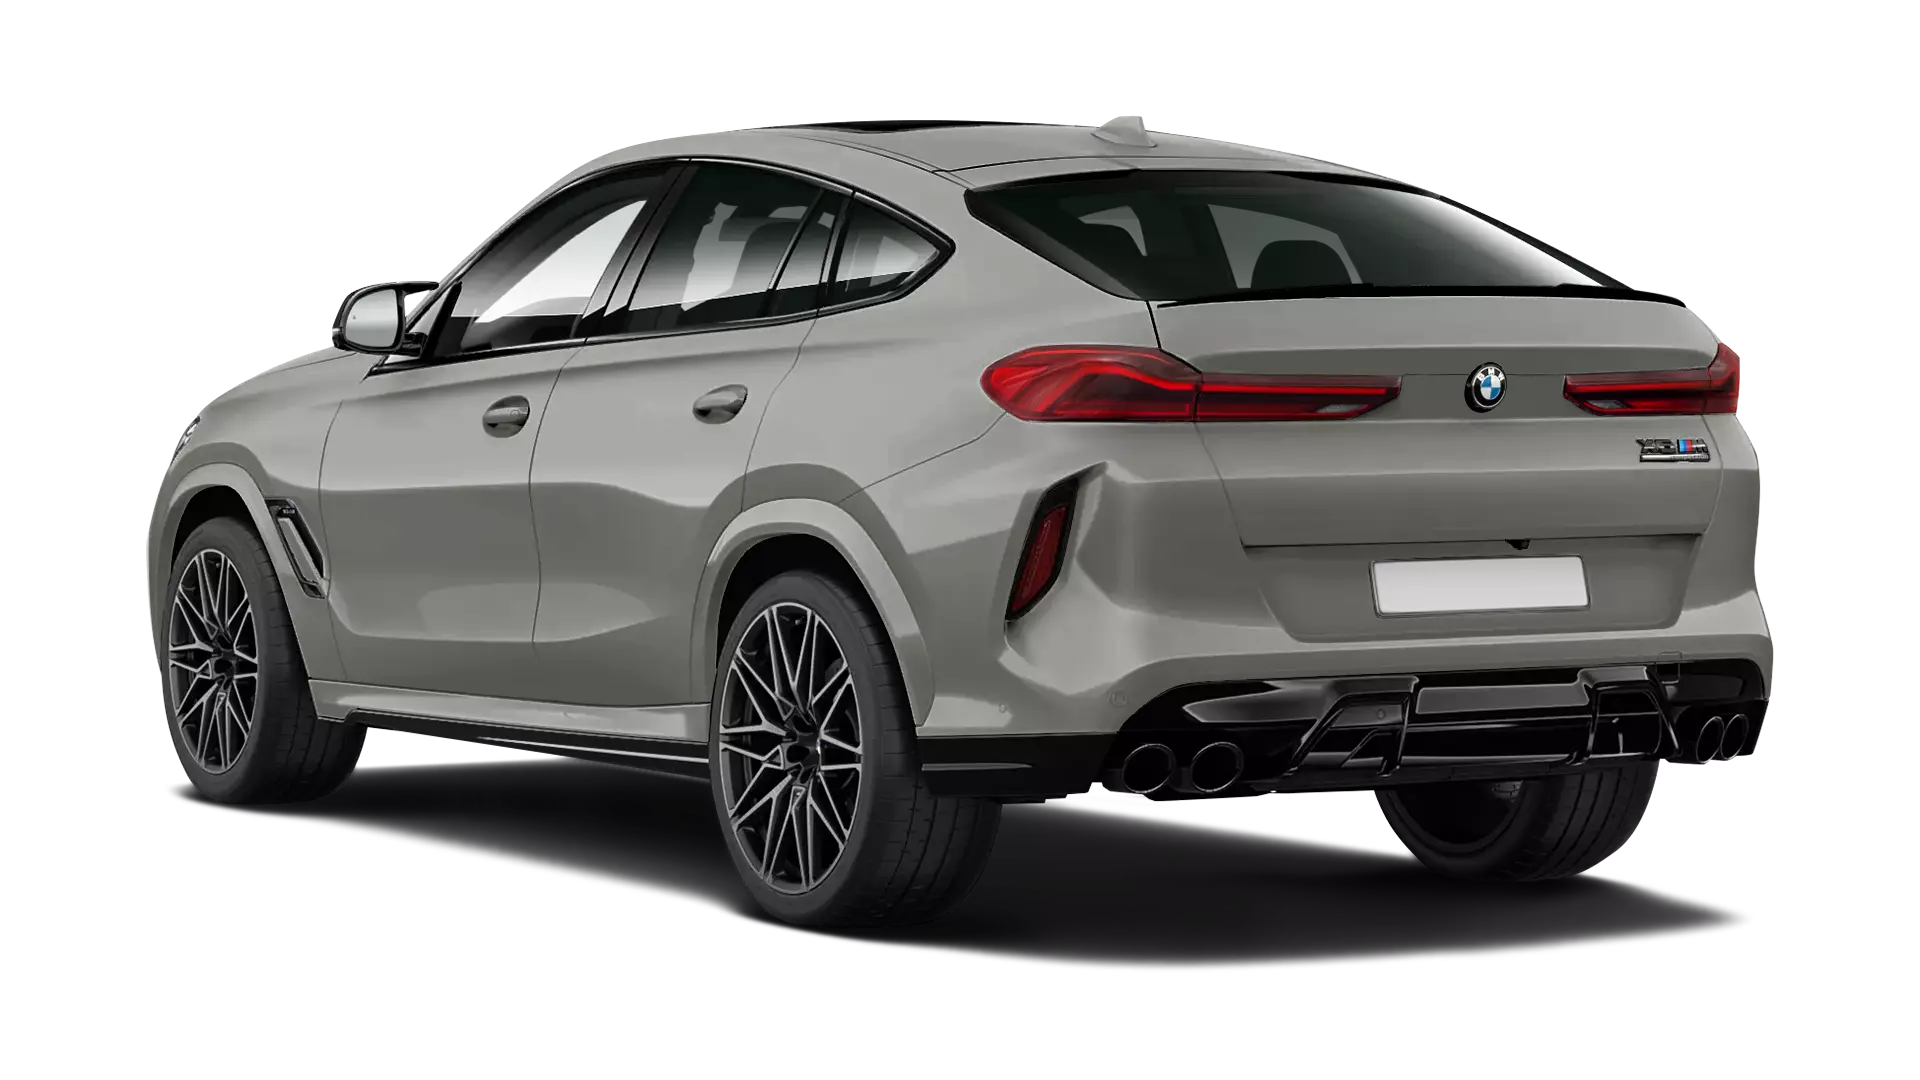 Larte Performance for BMW X6M Competition F96 (2019 - 2023)